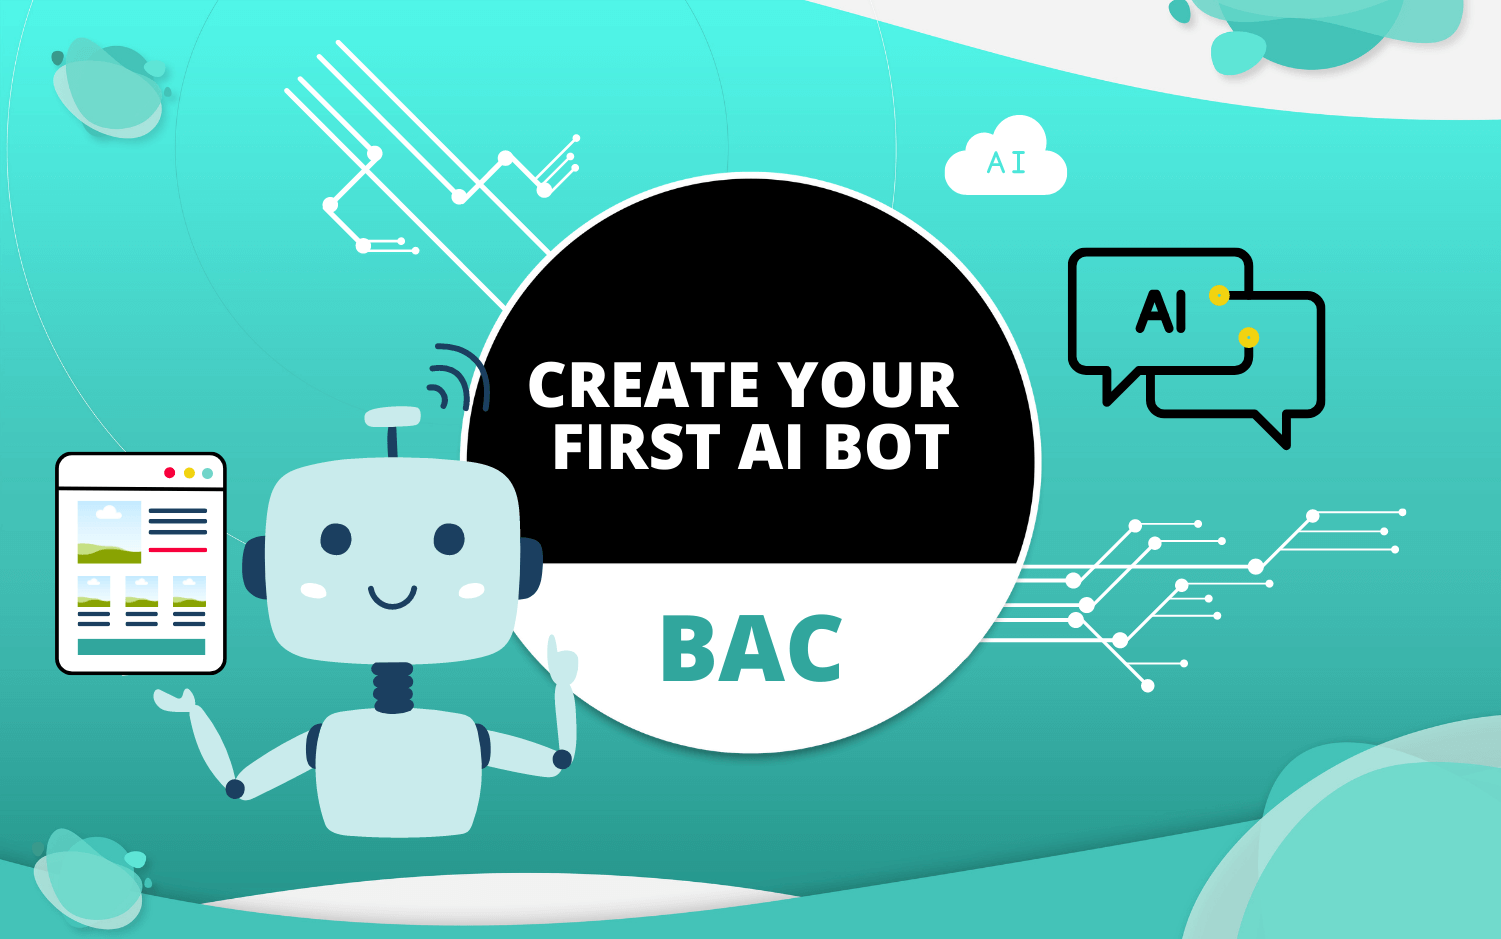 Create your First AI Bot